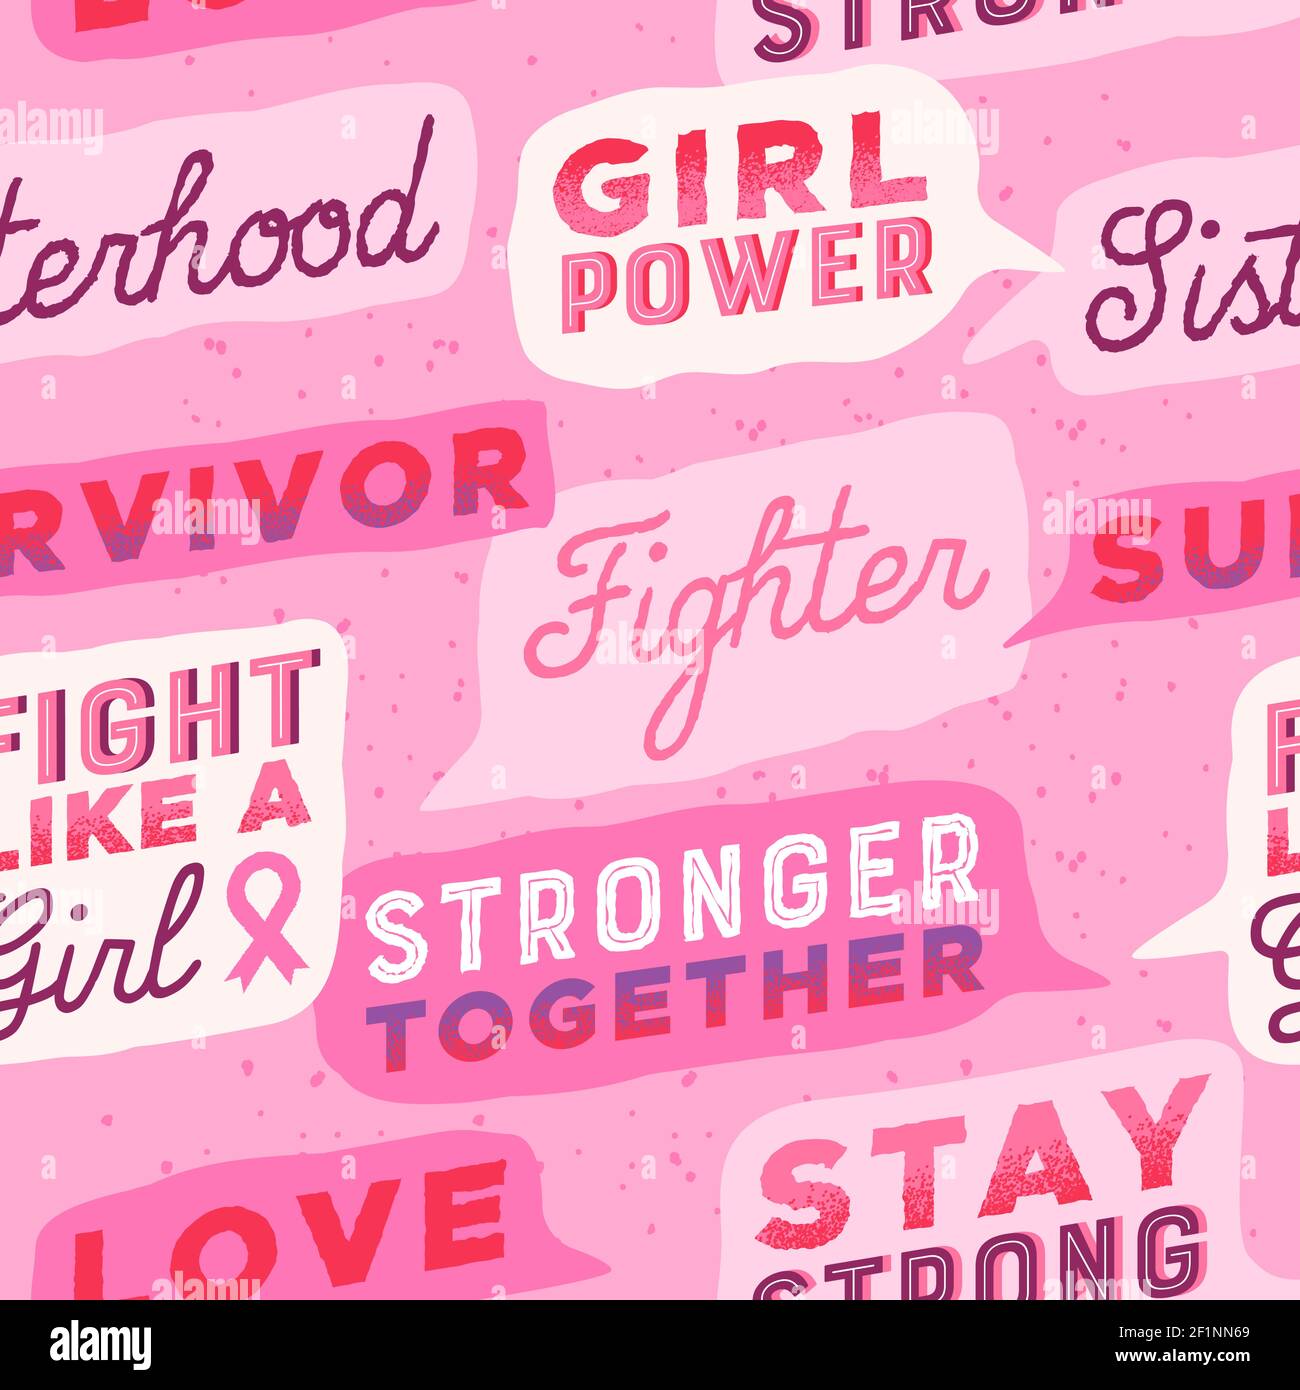 Breast Cancer awareness seamless pattern illustration of powerful